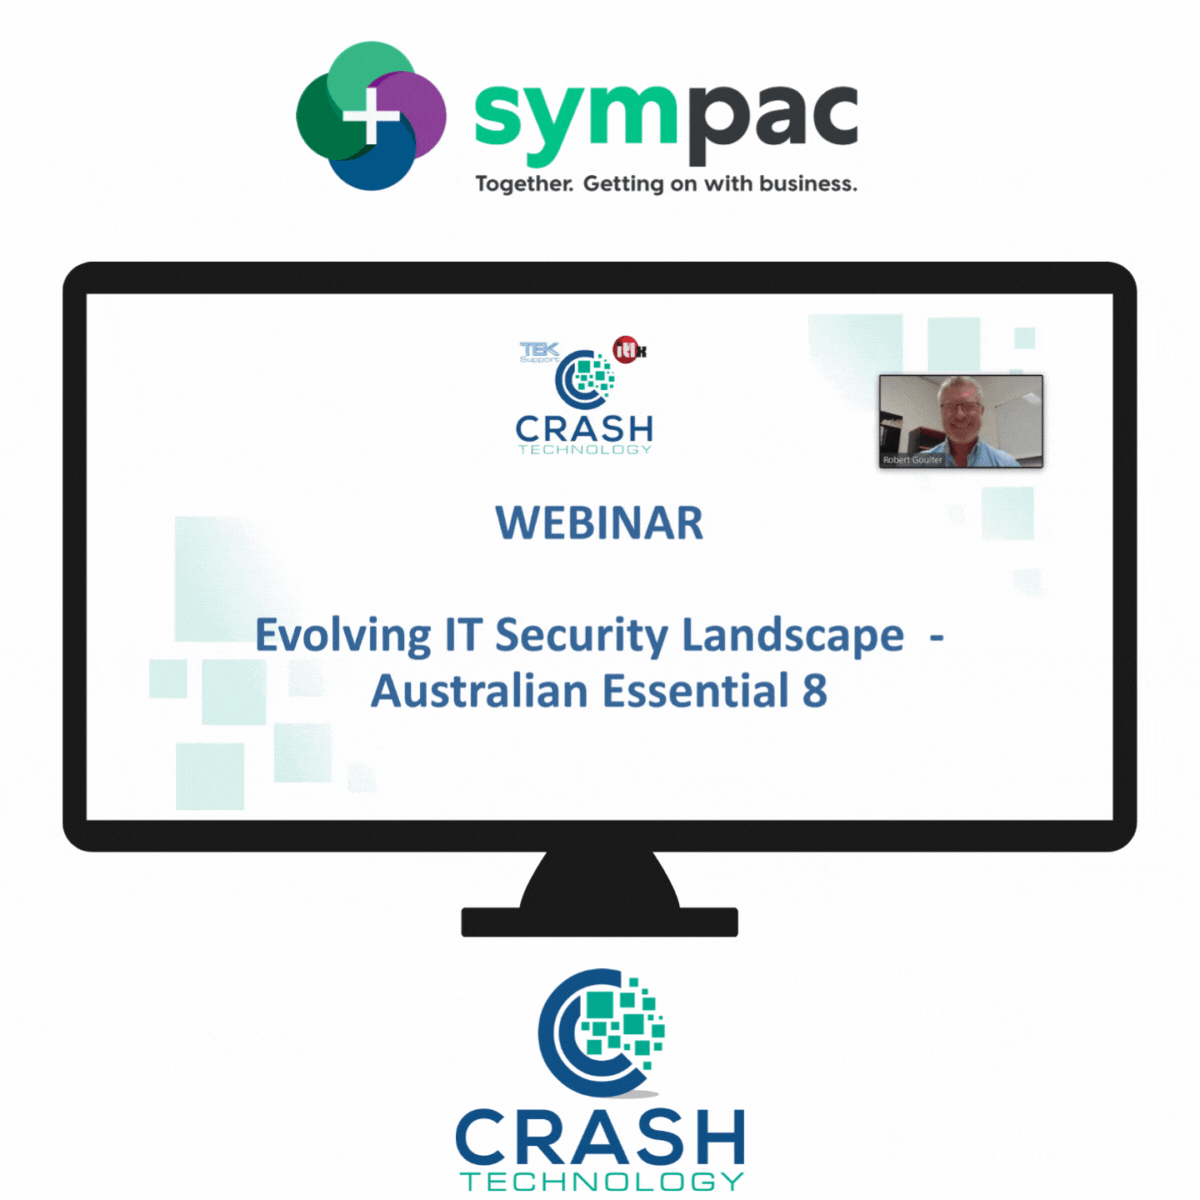 Sympac and Crash Technology webinar - Evolving IT Security and the Australian Essential 8